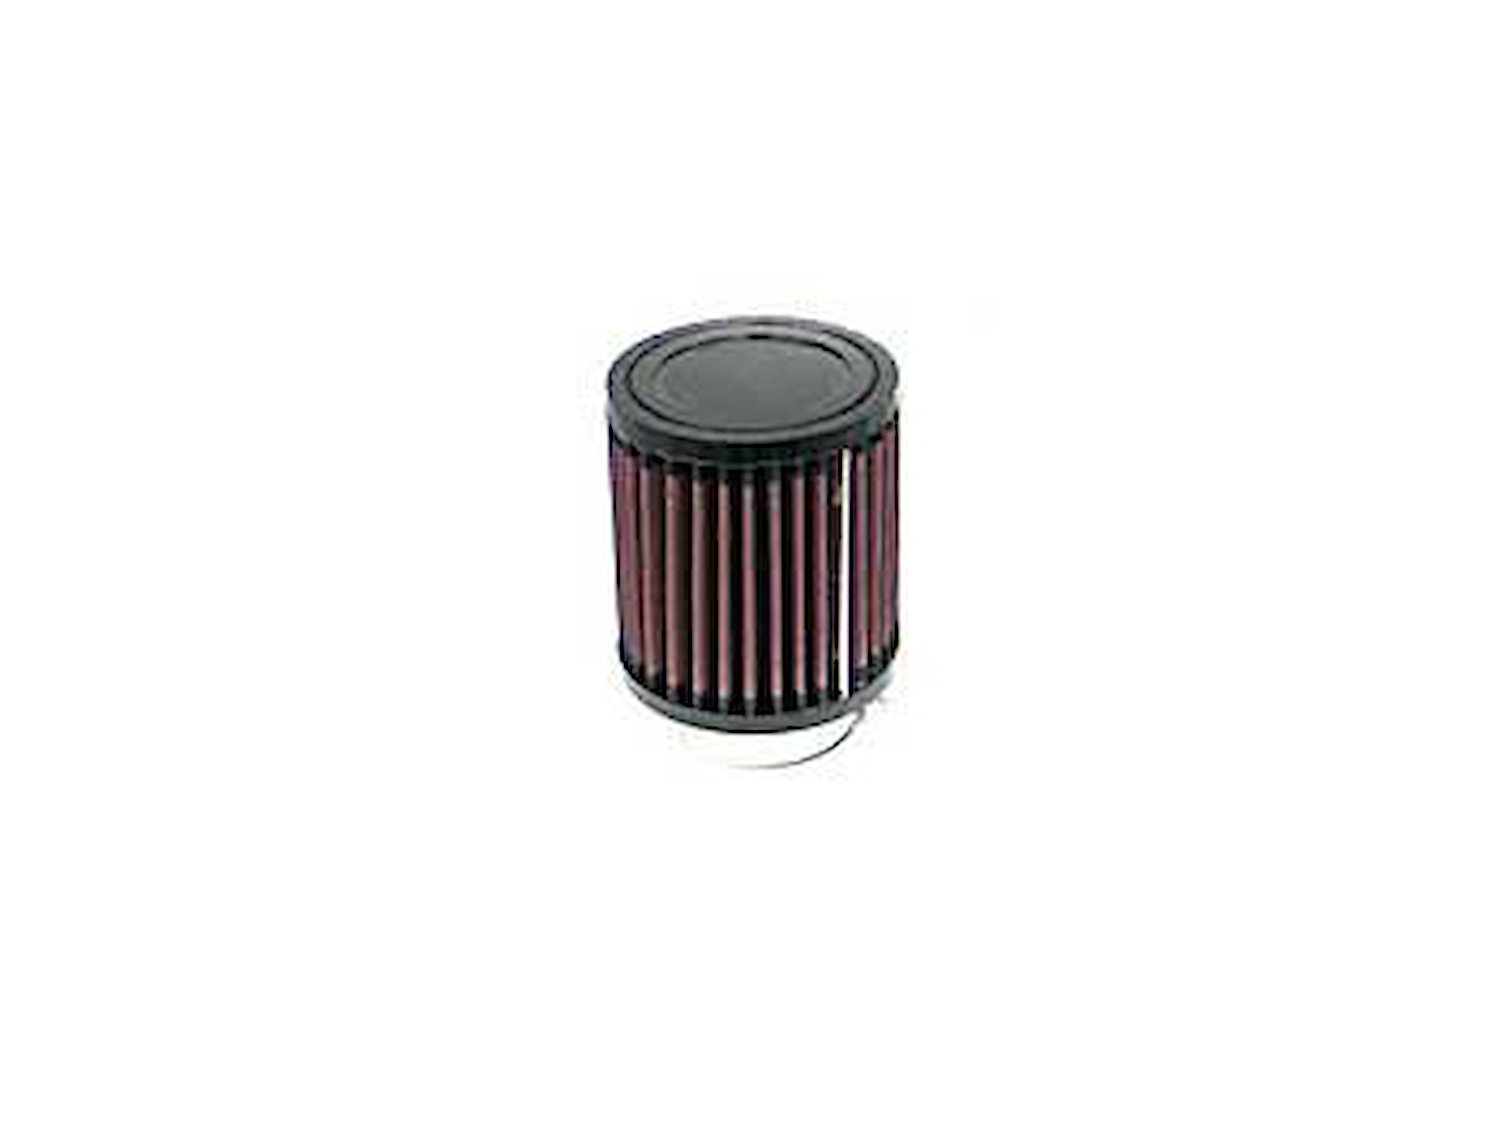 Round Straight Air Filter Flange Dia. (F): 2.125" (54 mm)